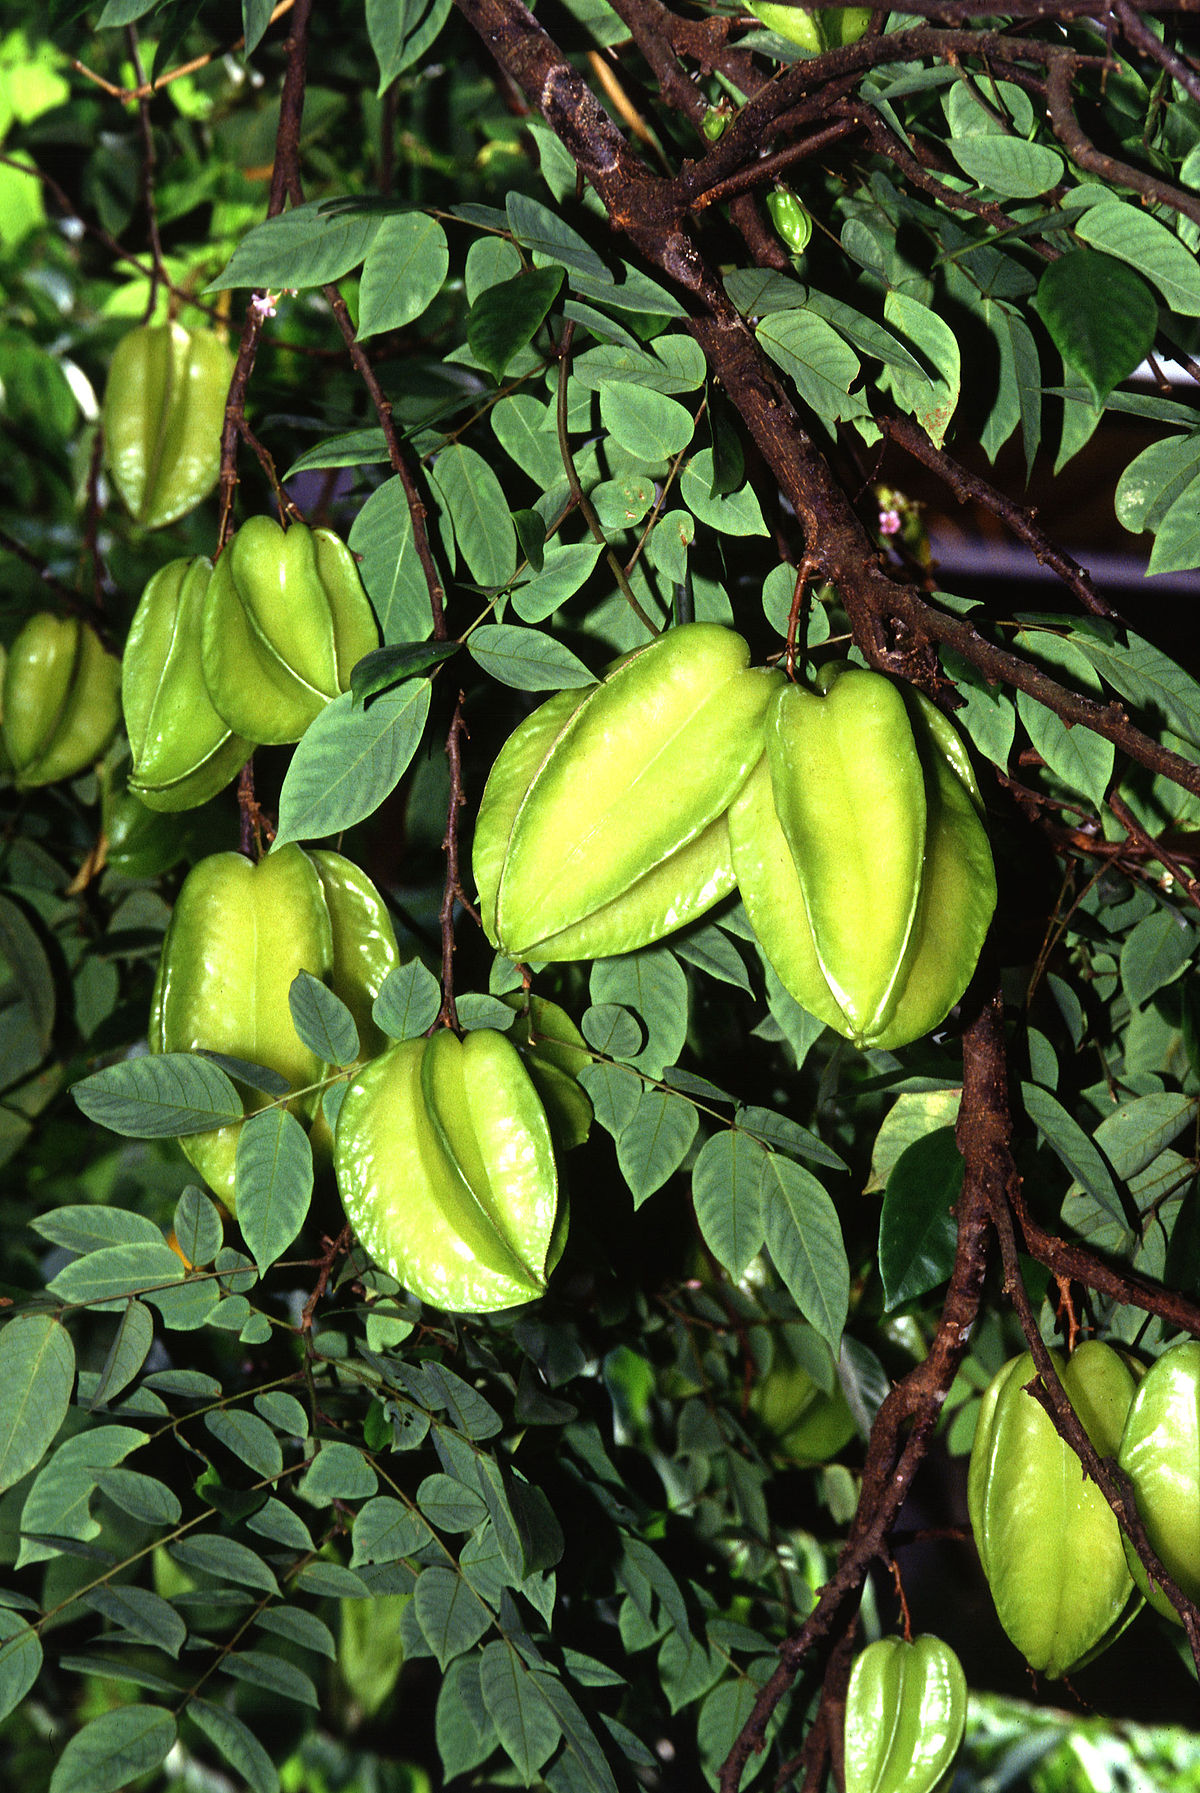 Star Fruit Pics, Food Collection